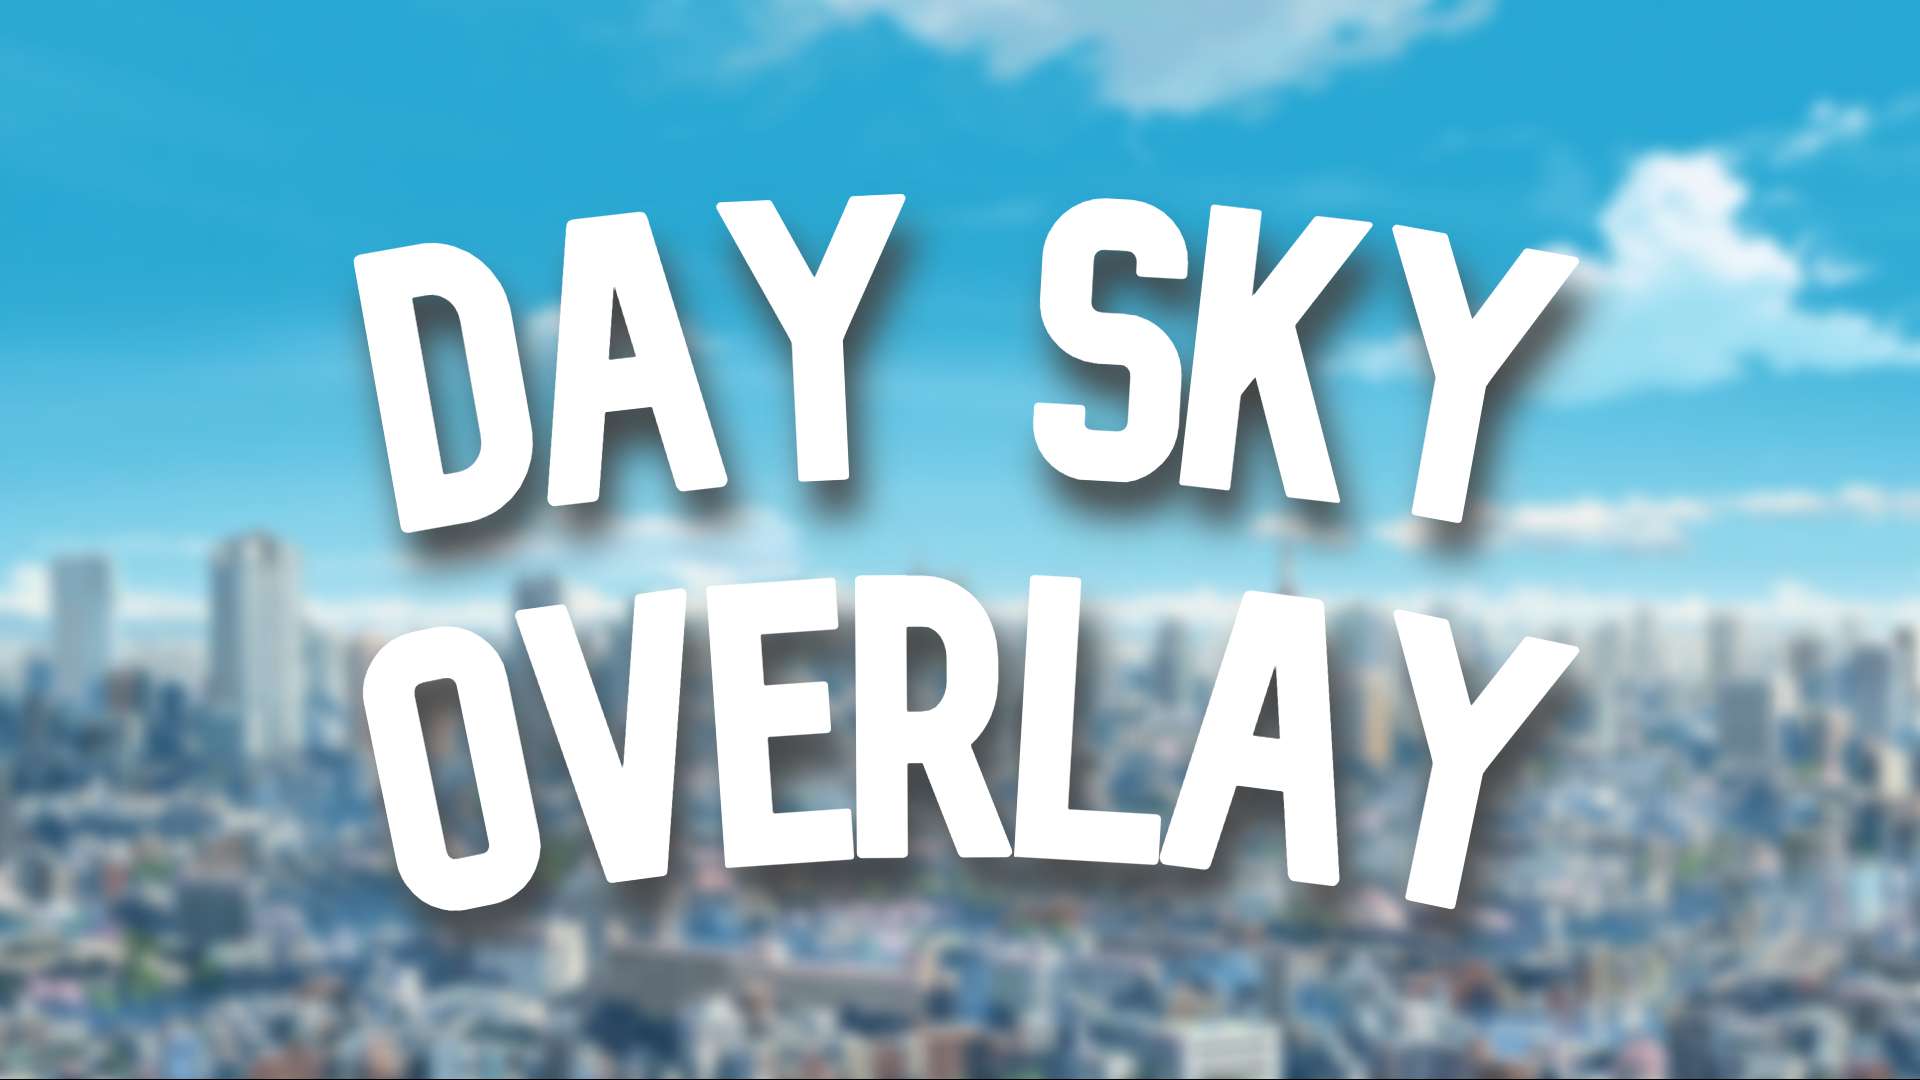 Day Sky Overlay #10 16x by rh56 on PvPRP